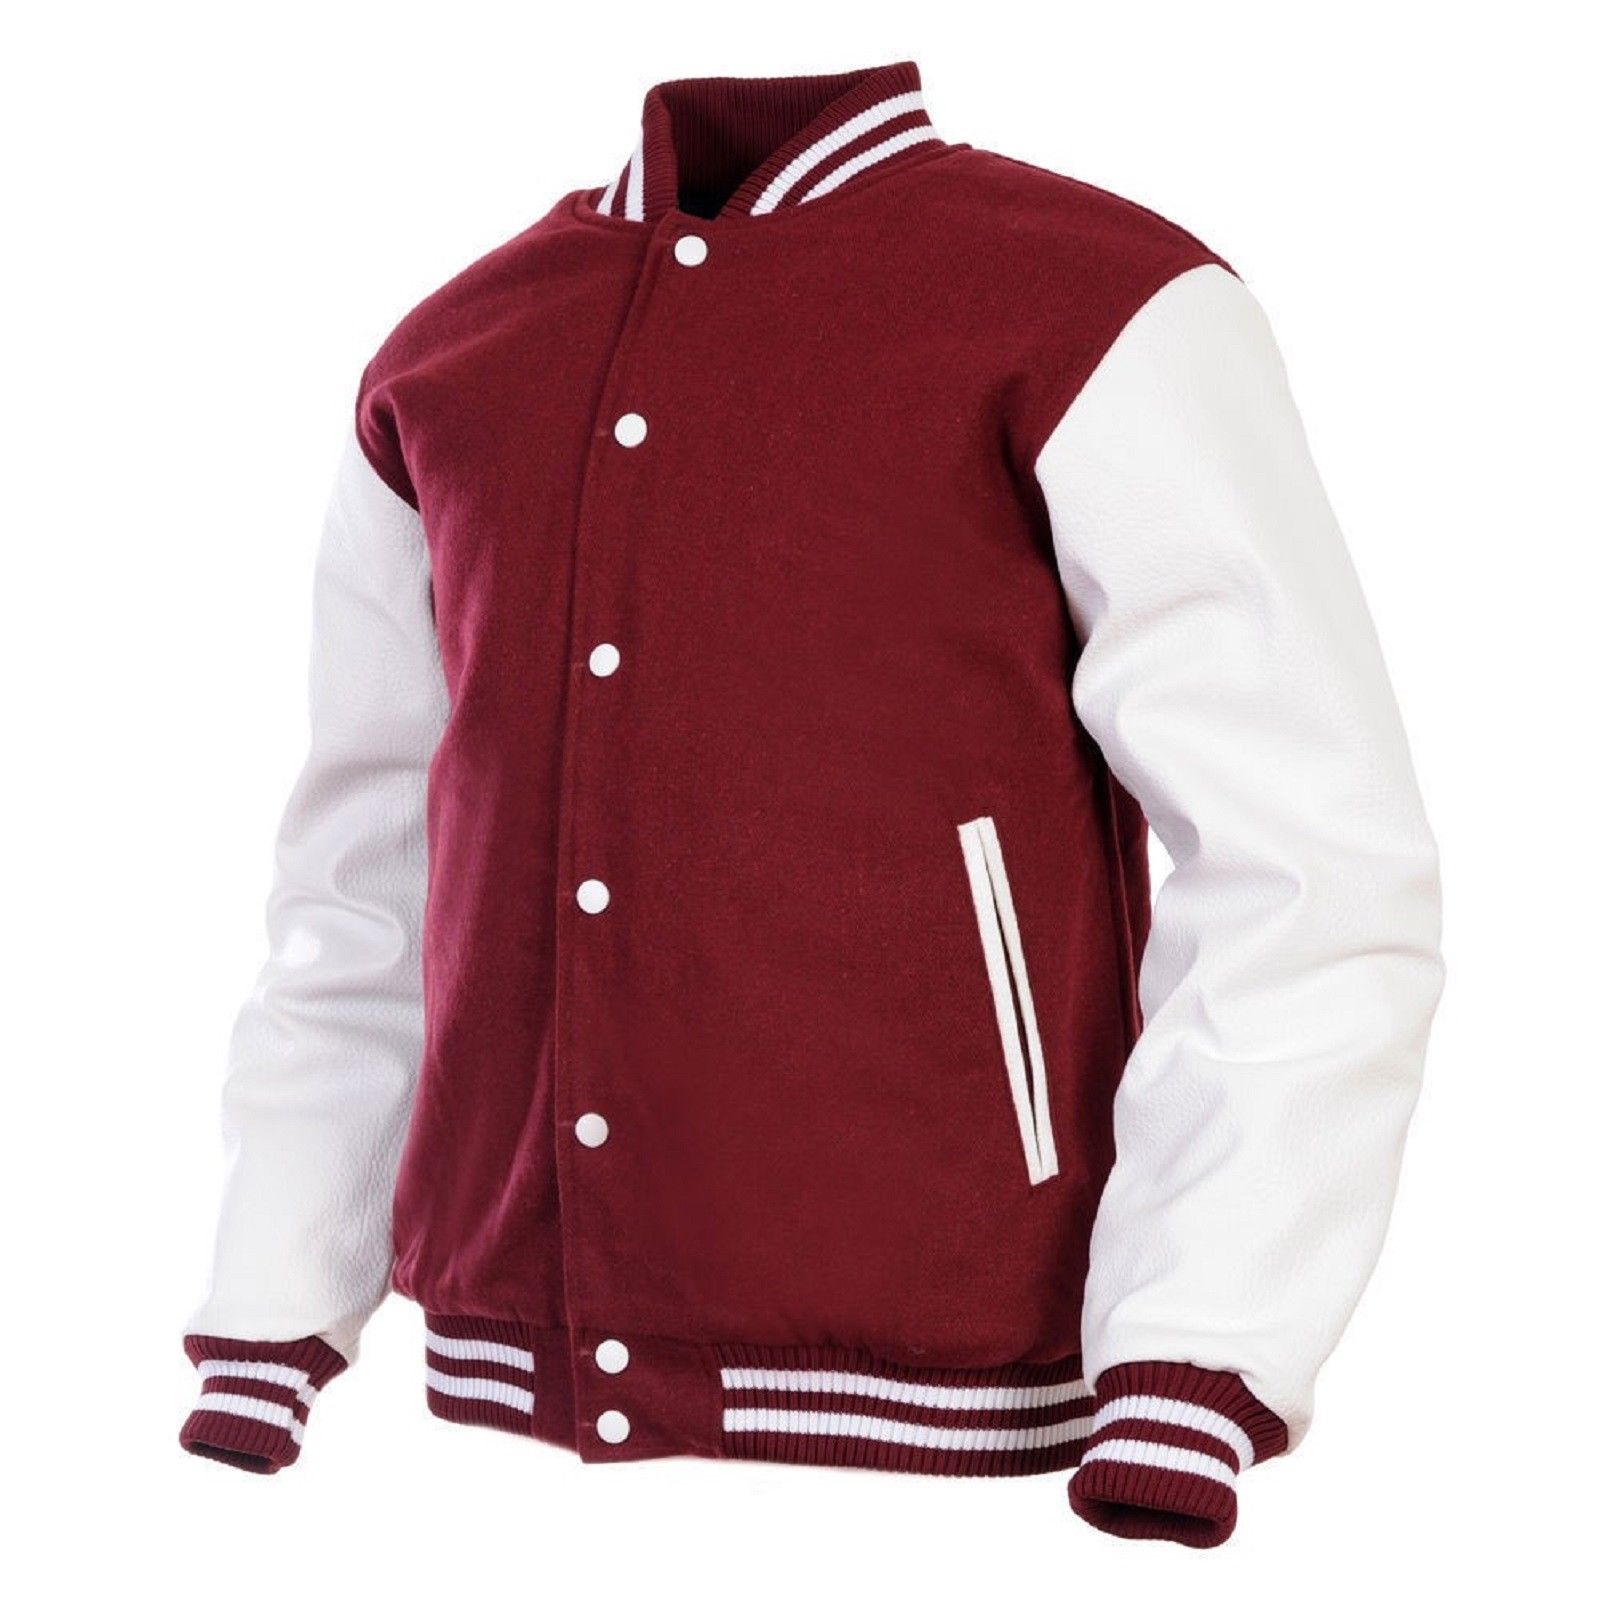 Men’s Varsity Jacket Faux Leather Sleeve and Wool Body Maroon/White